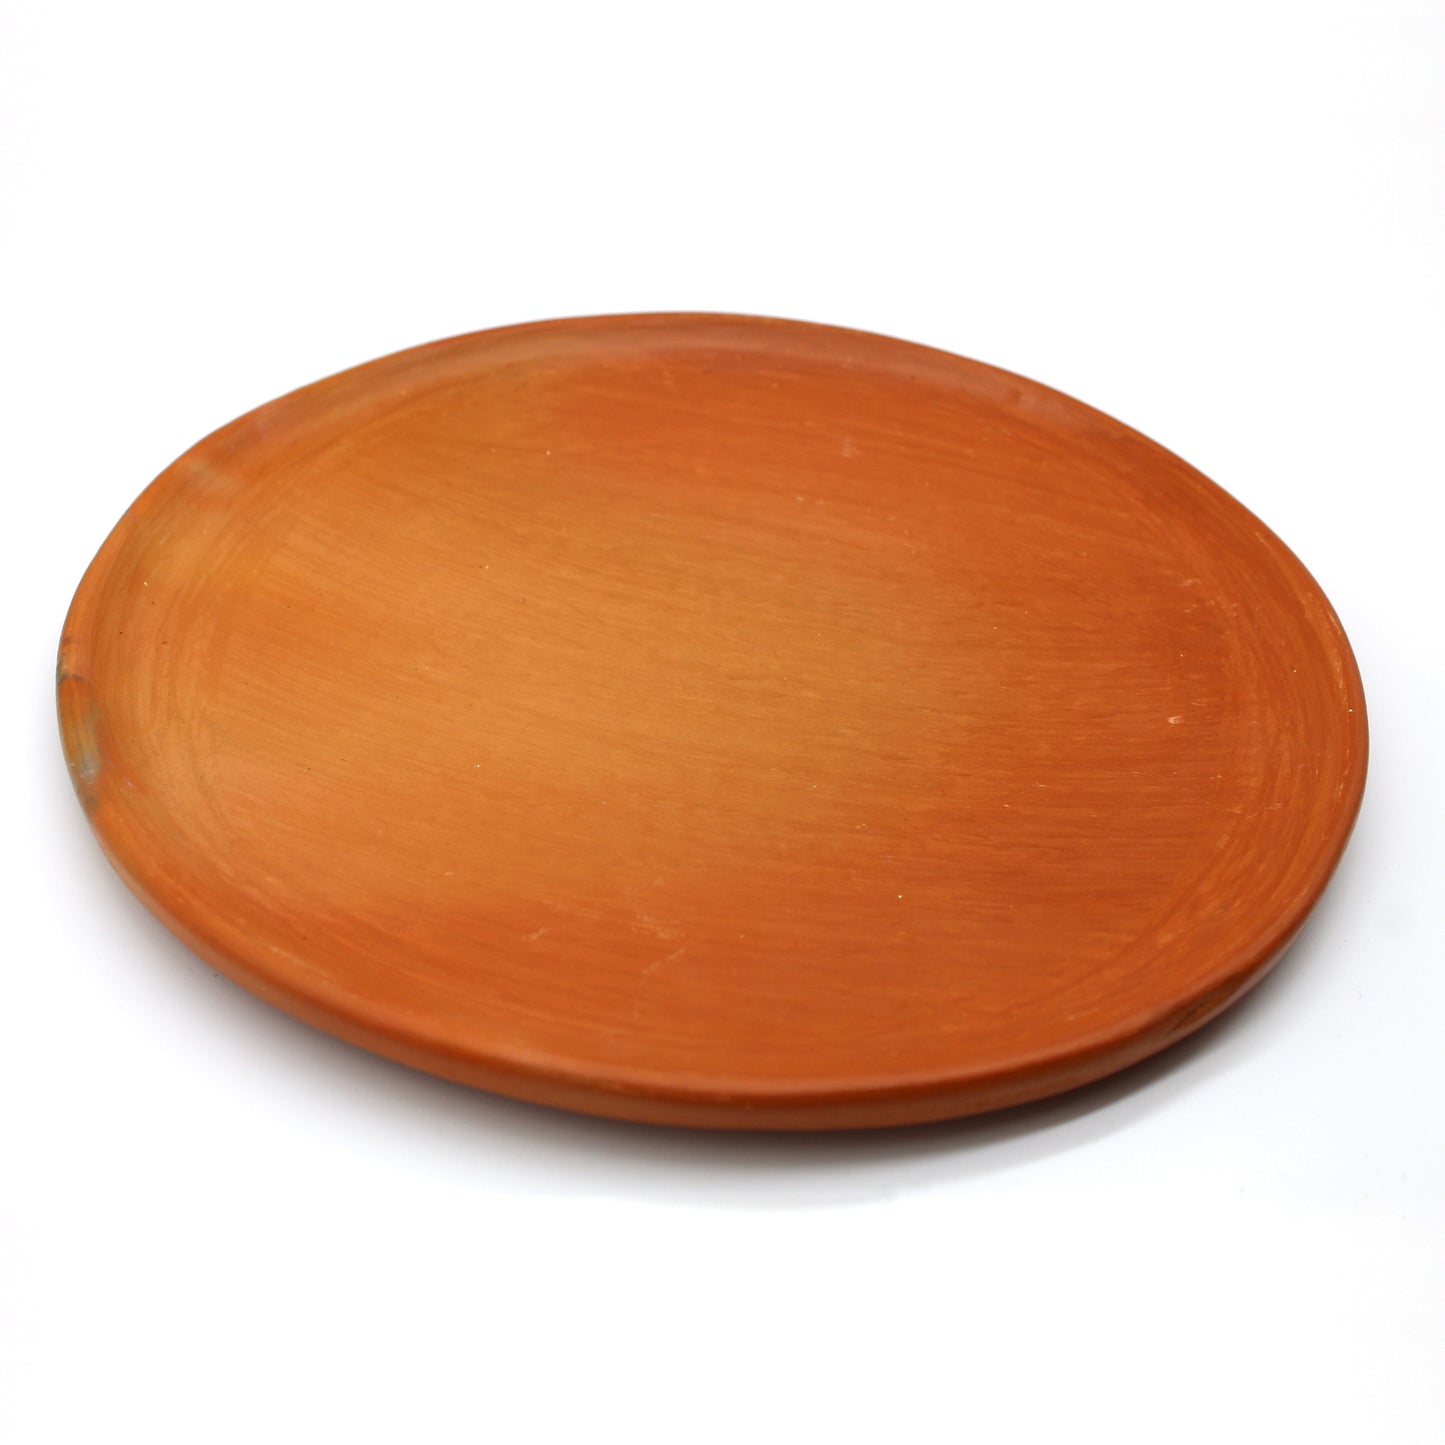 Terracotta Plates  - in sets of 4 per size